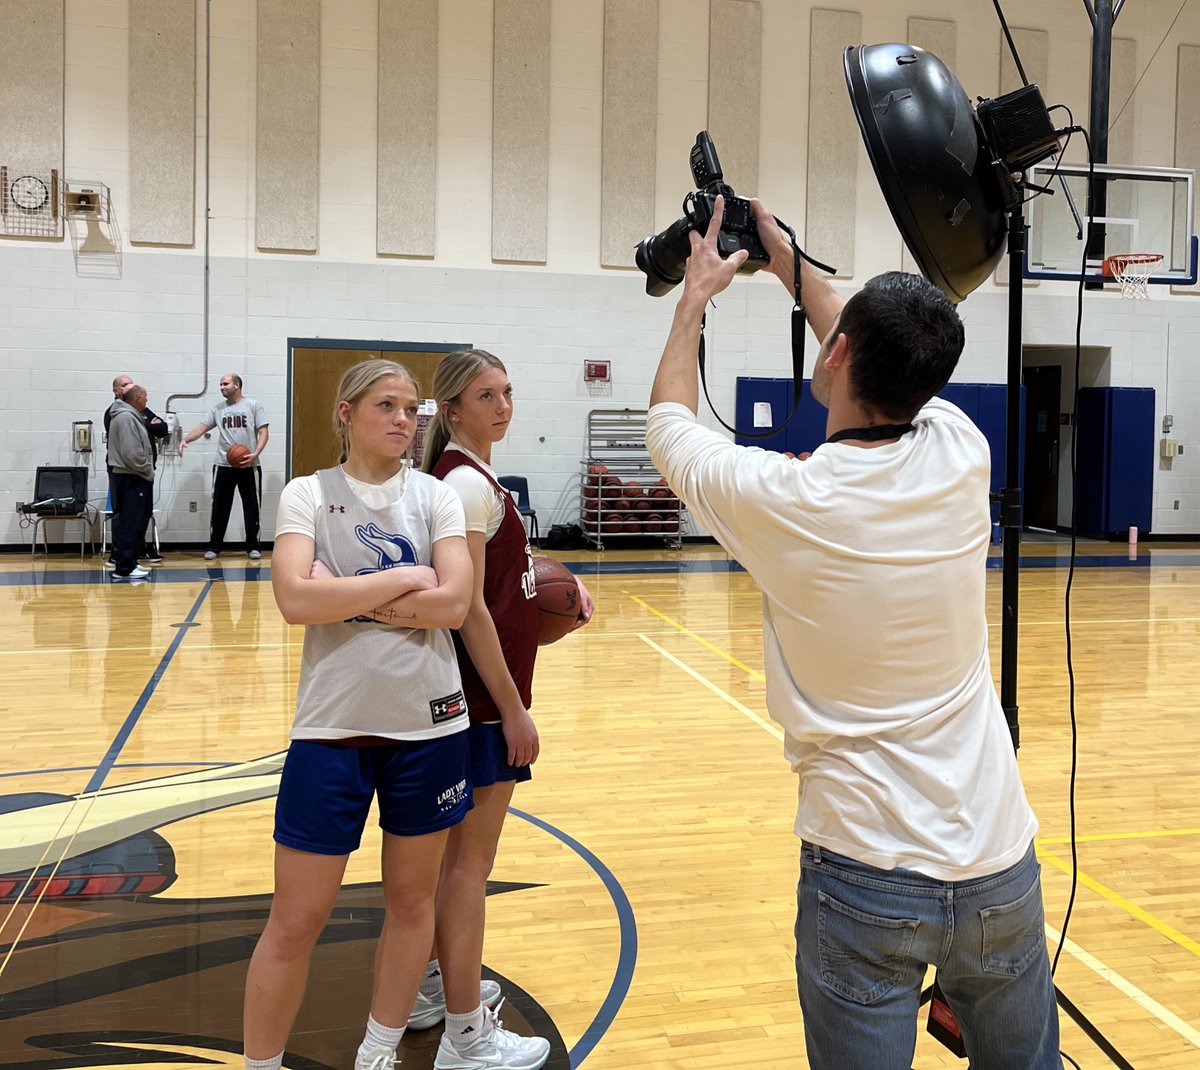 What’s it like playing with your sibling? Well, there’s a lot of fights about missing warmups 😂 There’s also a lot of time together to help each other become better hoopers. This story will come later in the week on @CJOnline